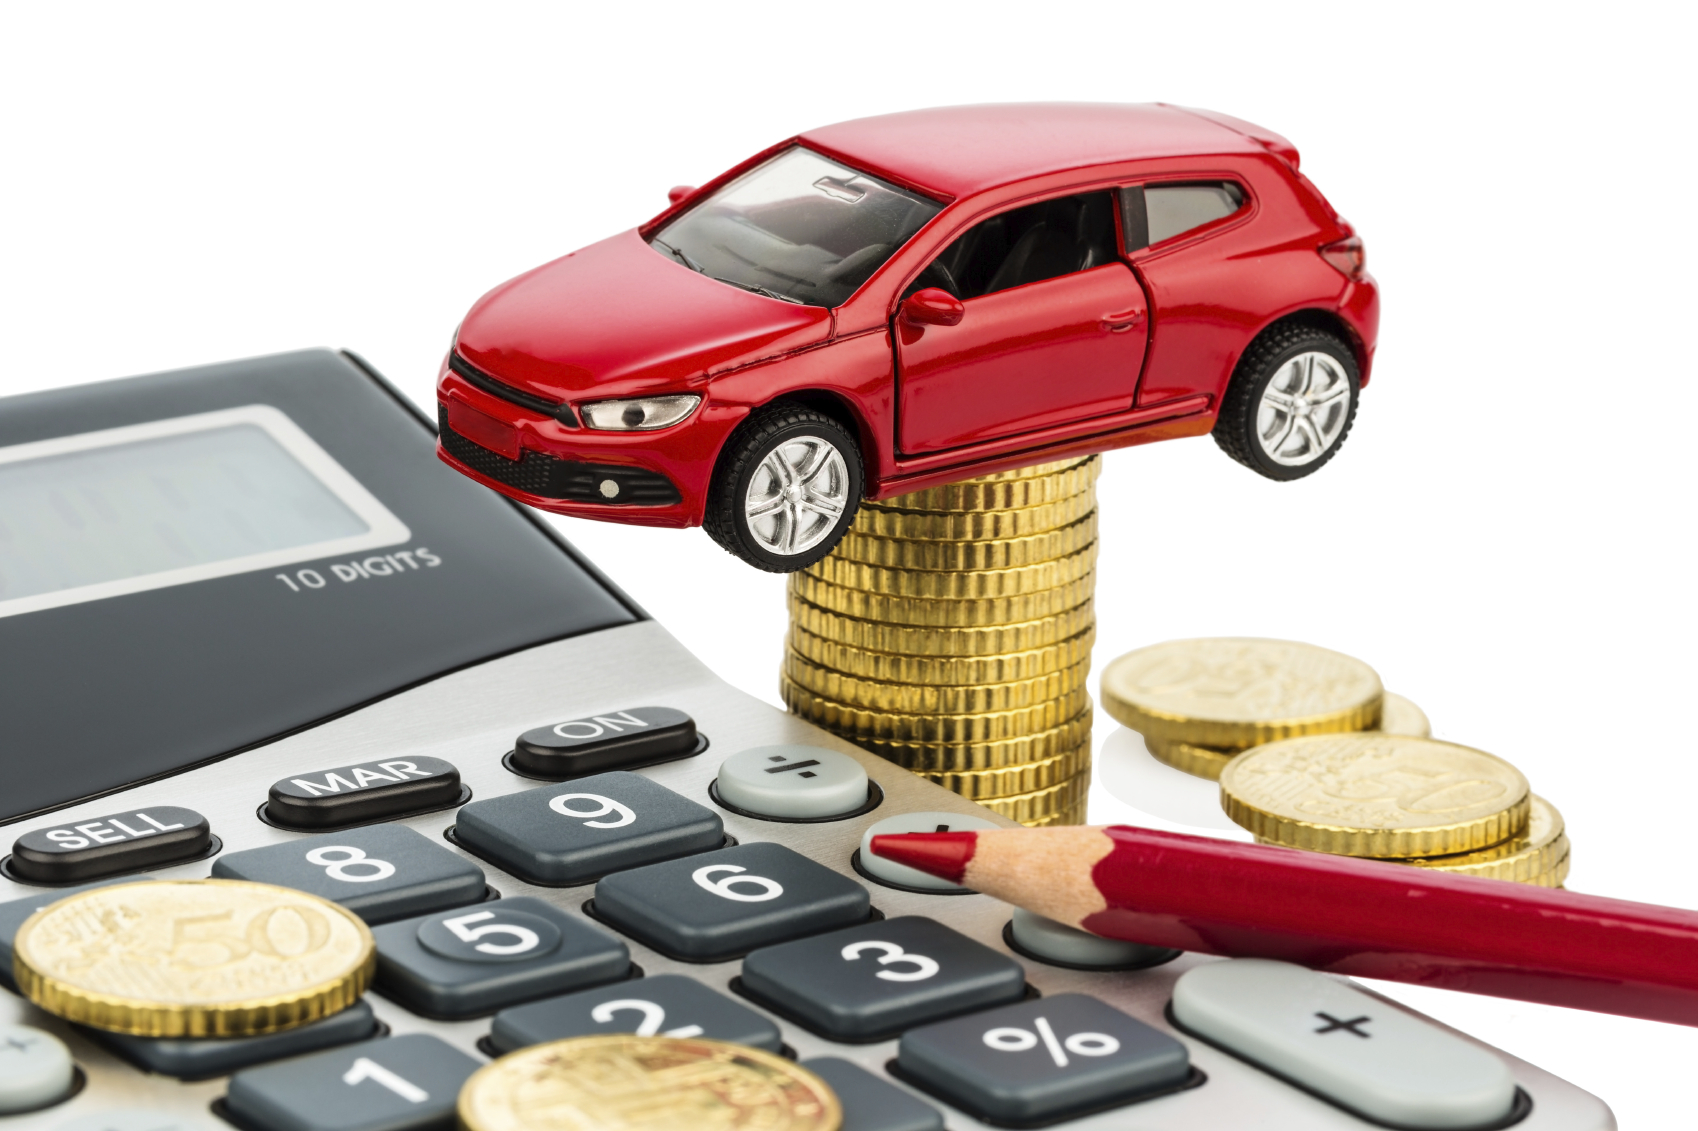 car and calculator. rising costs for car purchase, lease, service, refueling and insurance